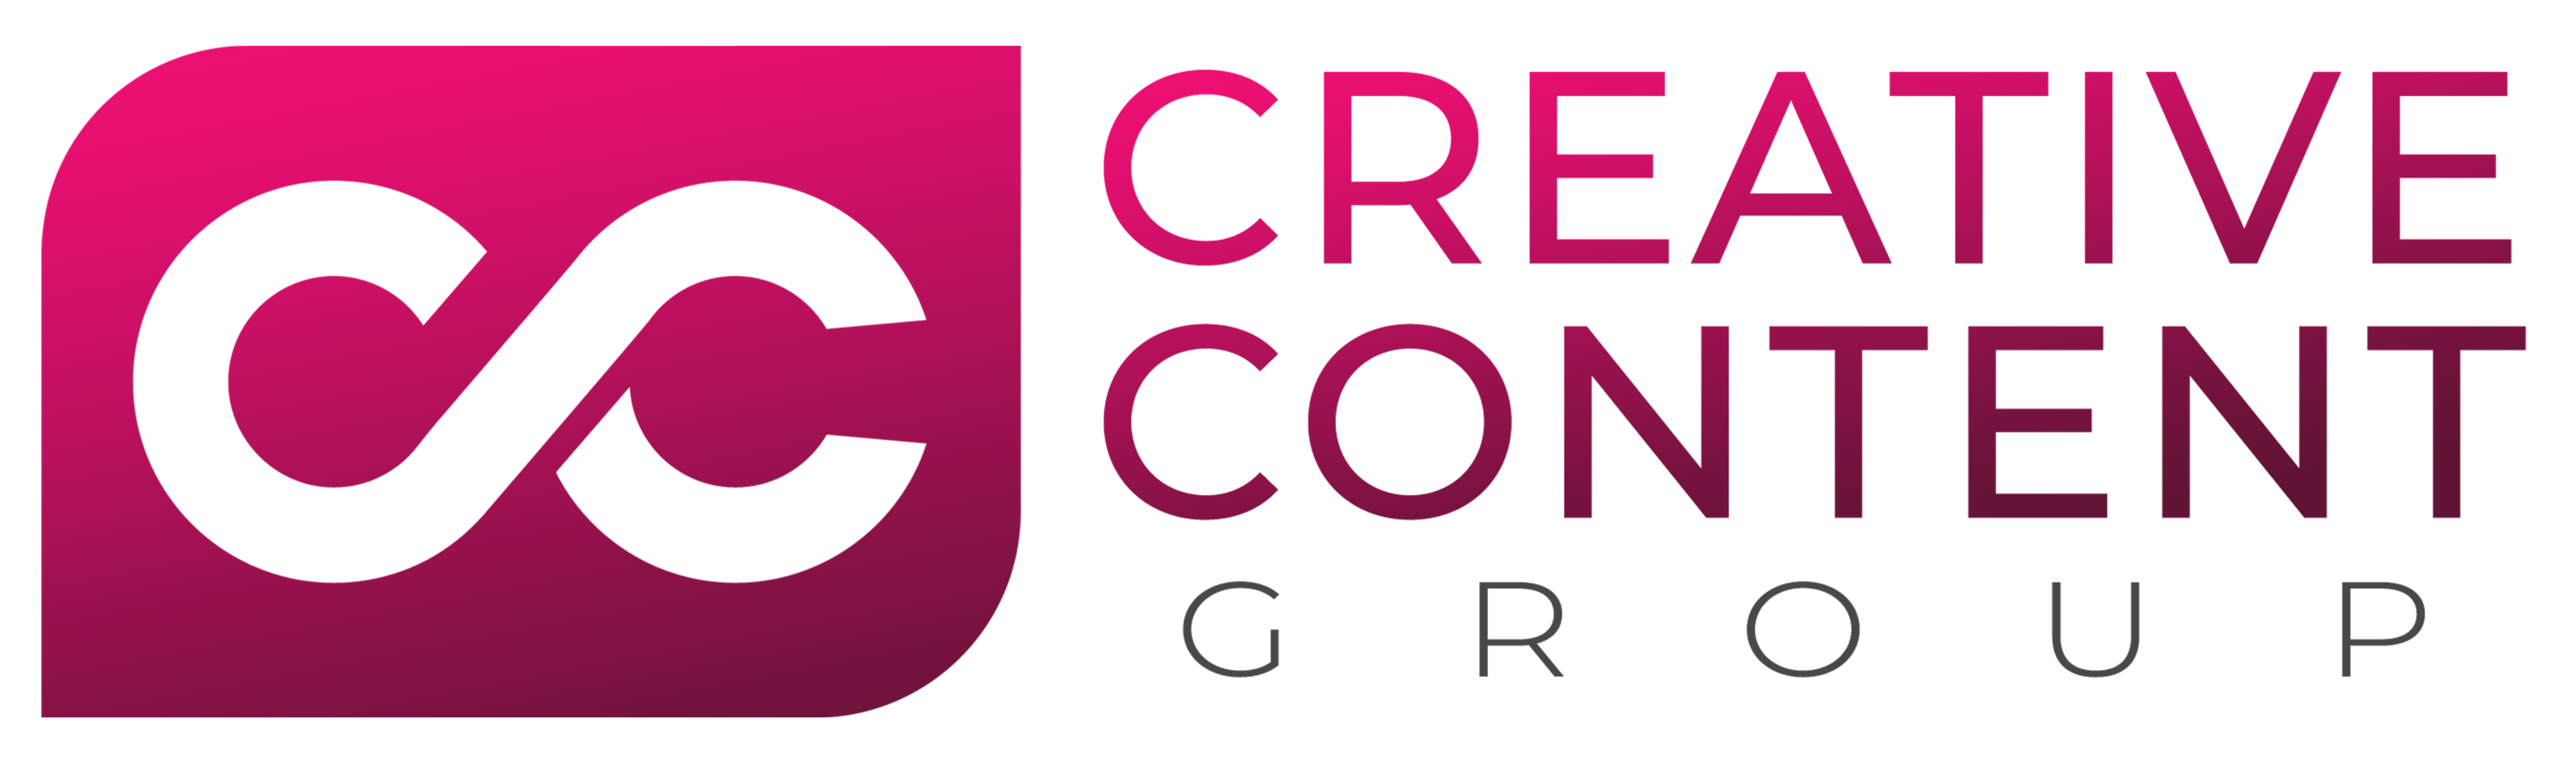 Creative Content Group